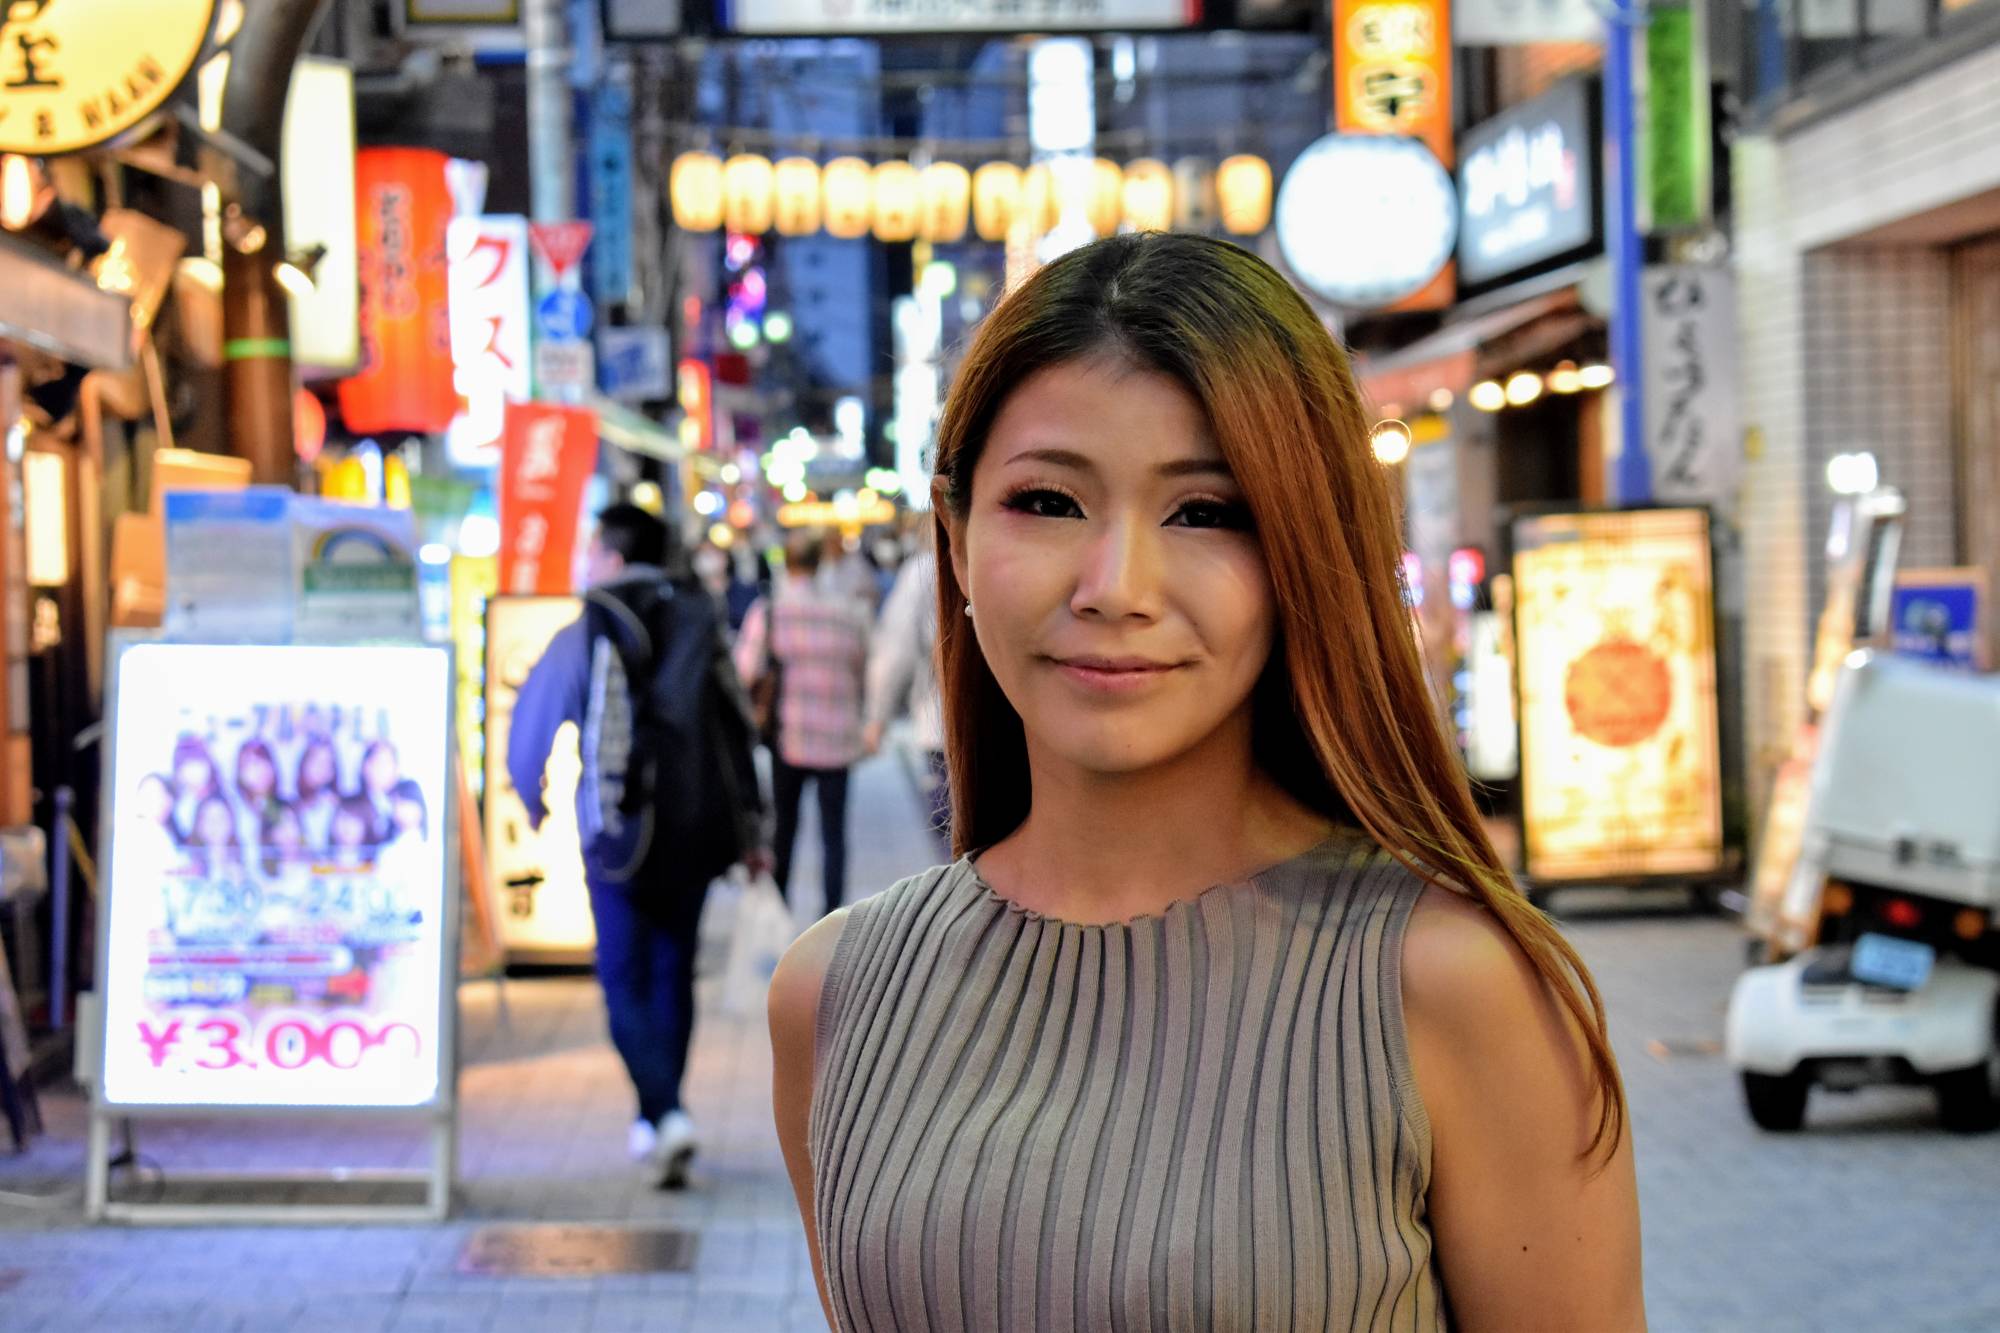 Shocking discrimination Japans sex industry cries foul over exclusion from government photo